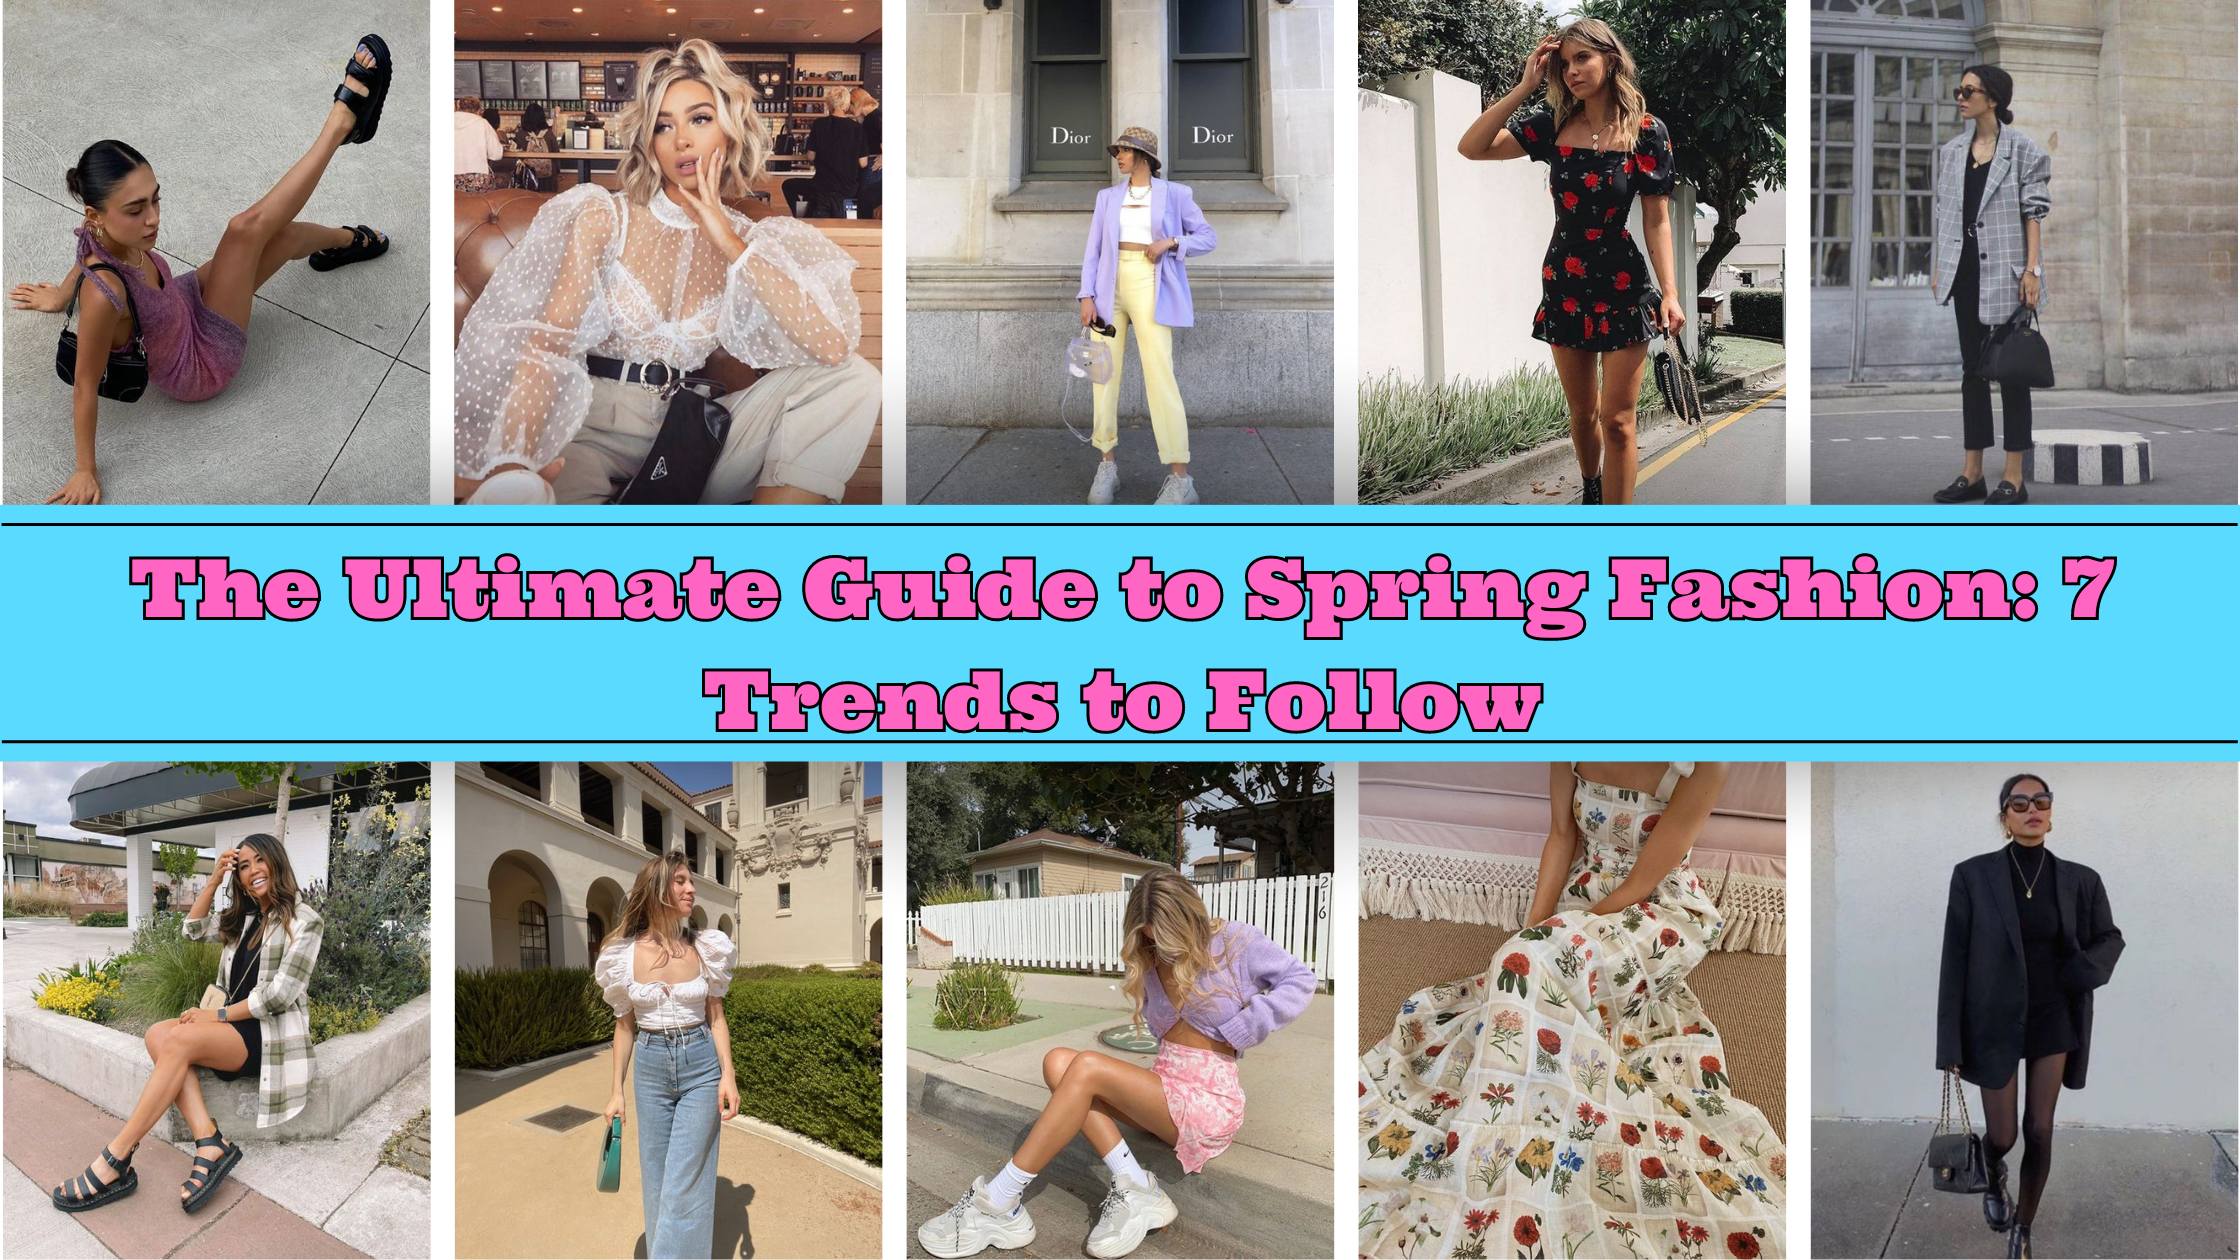 The Ultimate Guide to Spring Fashion: 7 Trends to Follow